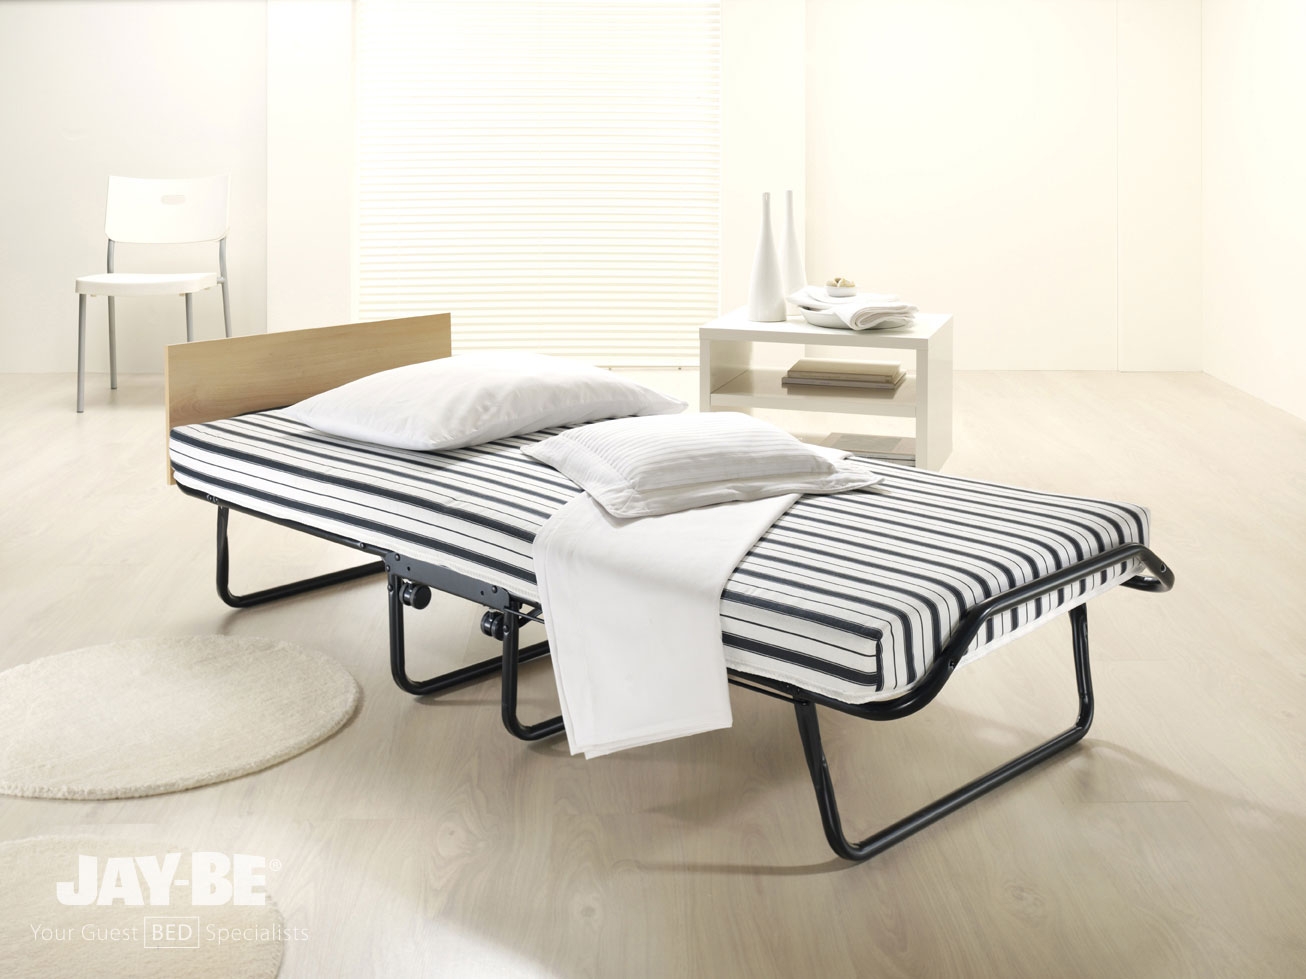 Jay-Be Jubilee Airflow Single Folding Bed with